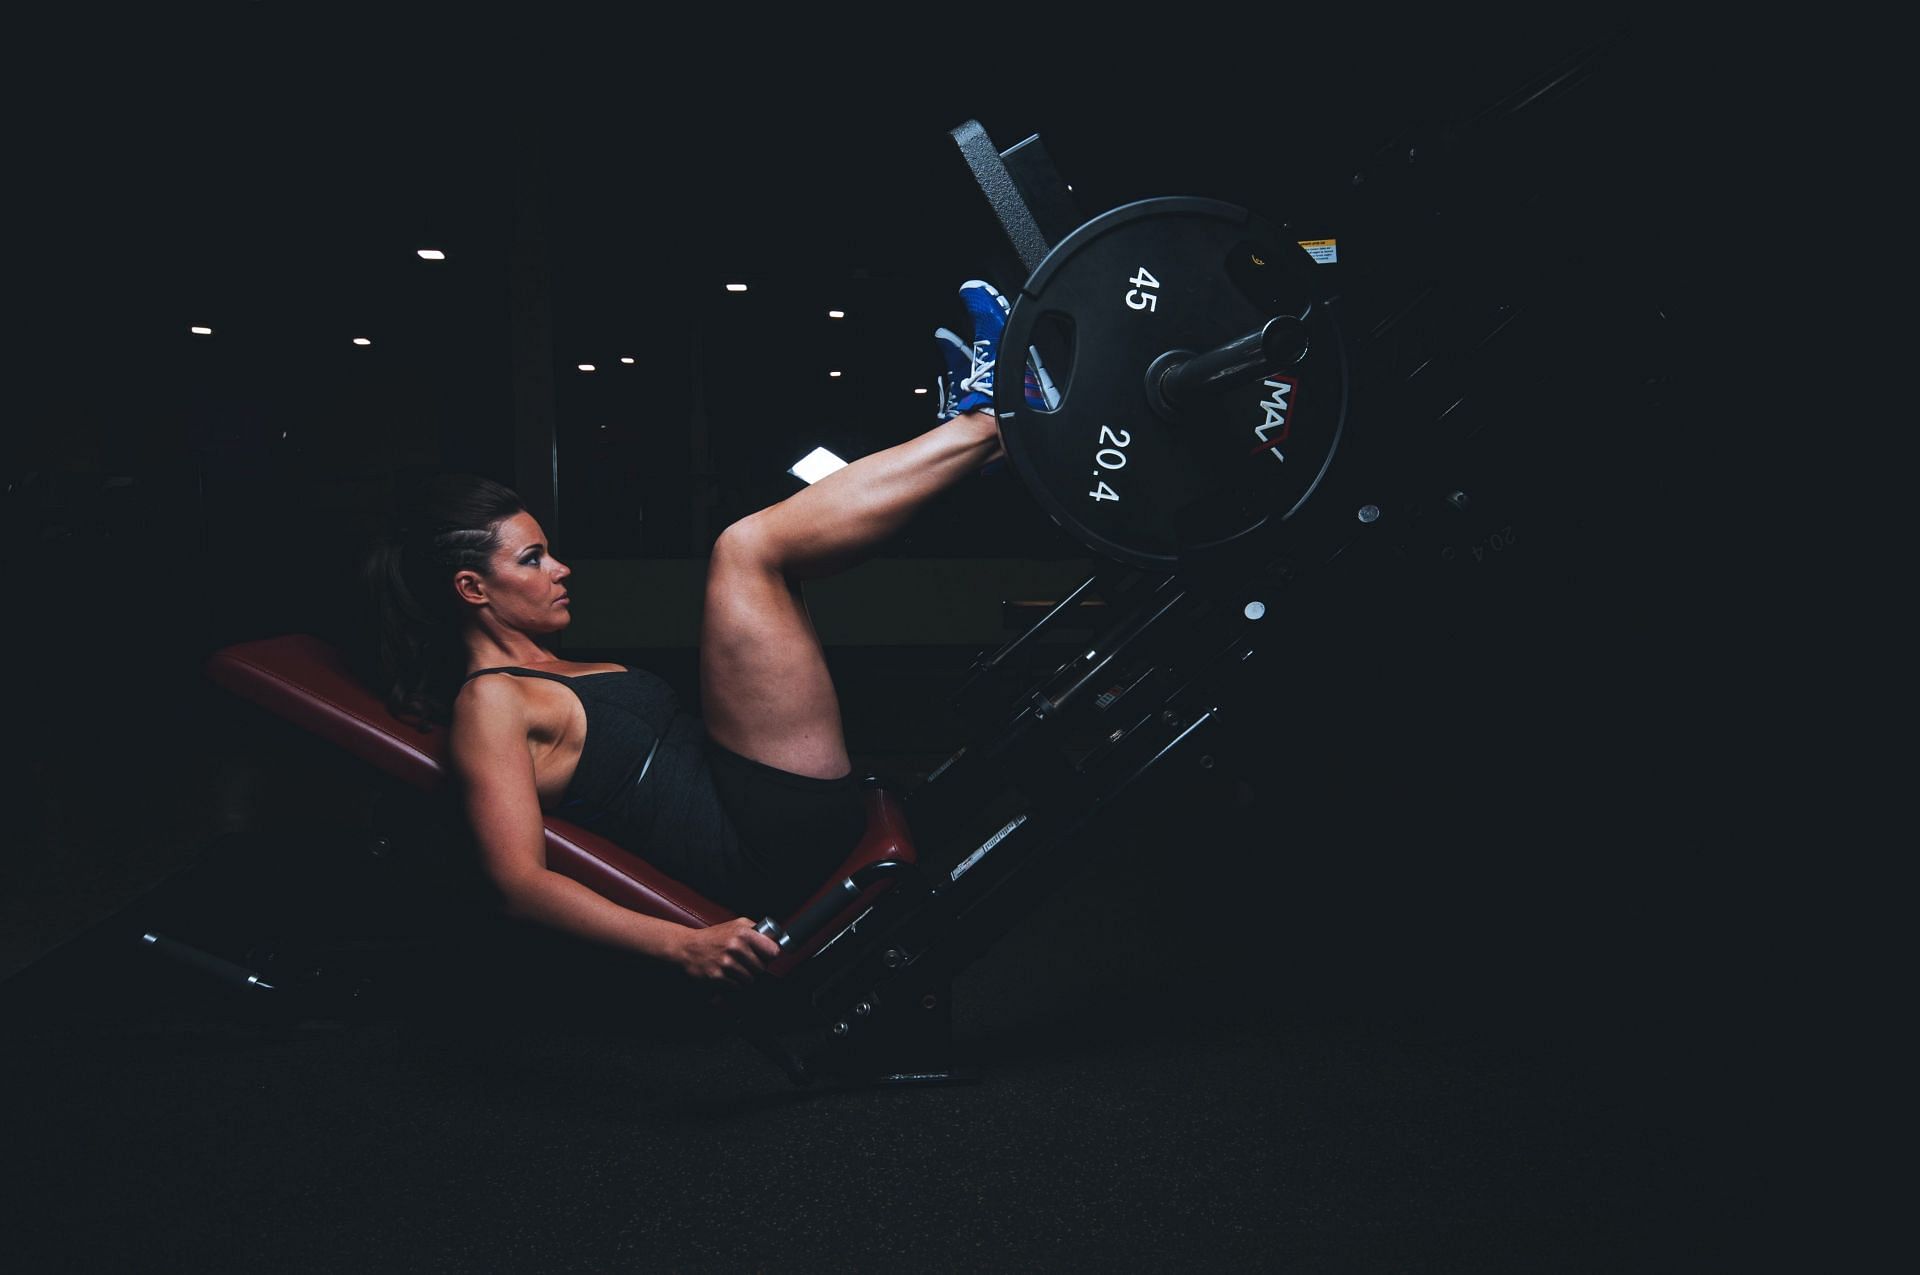 A strong lower body is crucial for performing everyday tasks and activities. (Image via Unsplash/Scott Webb)